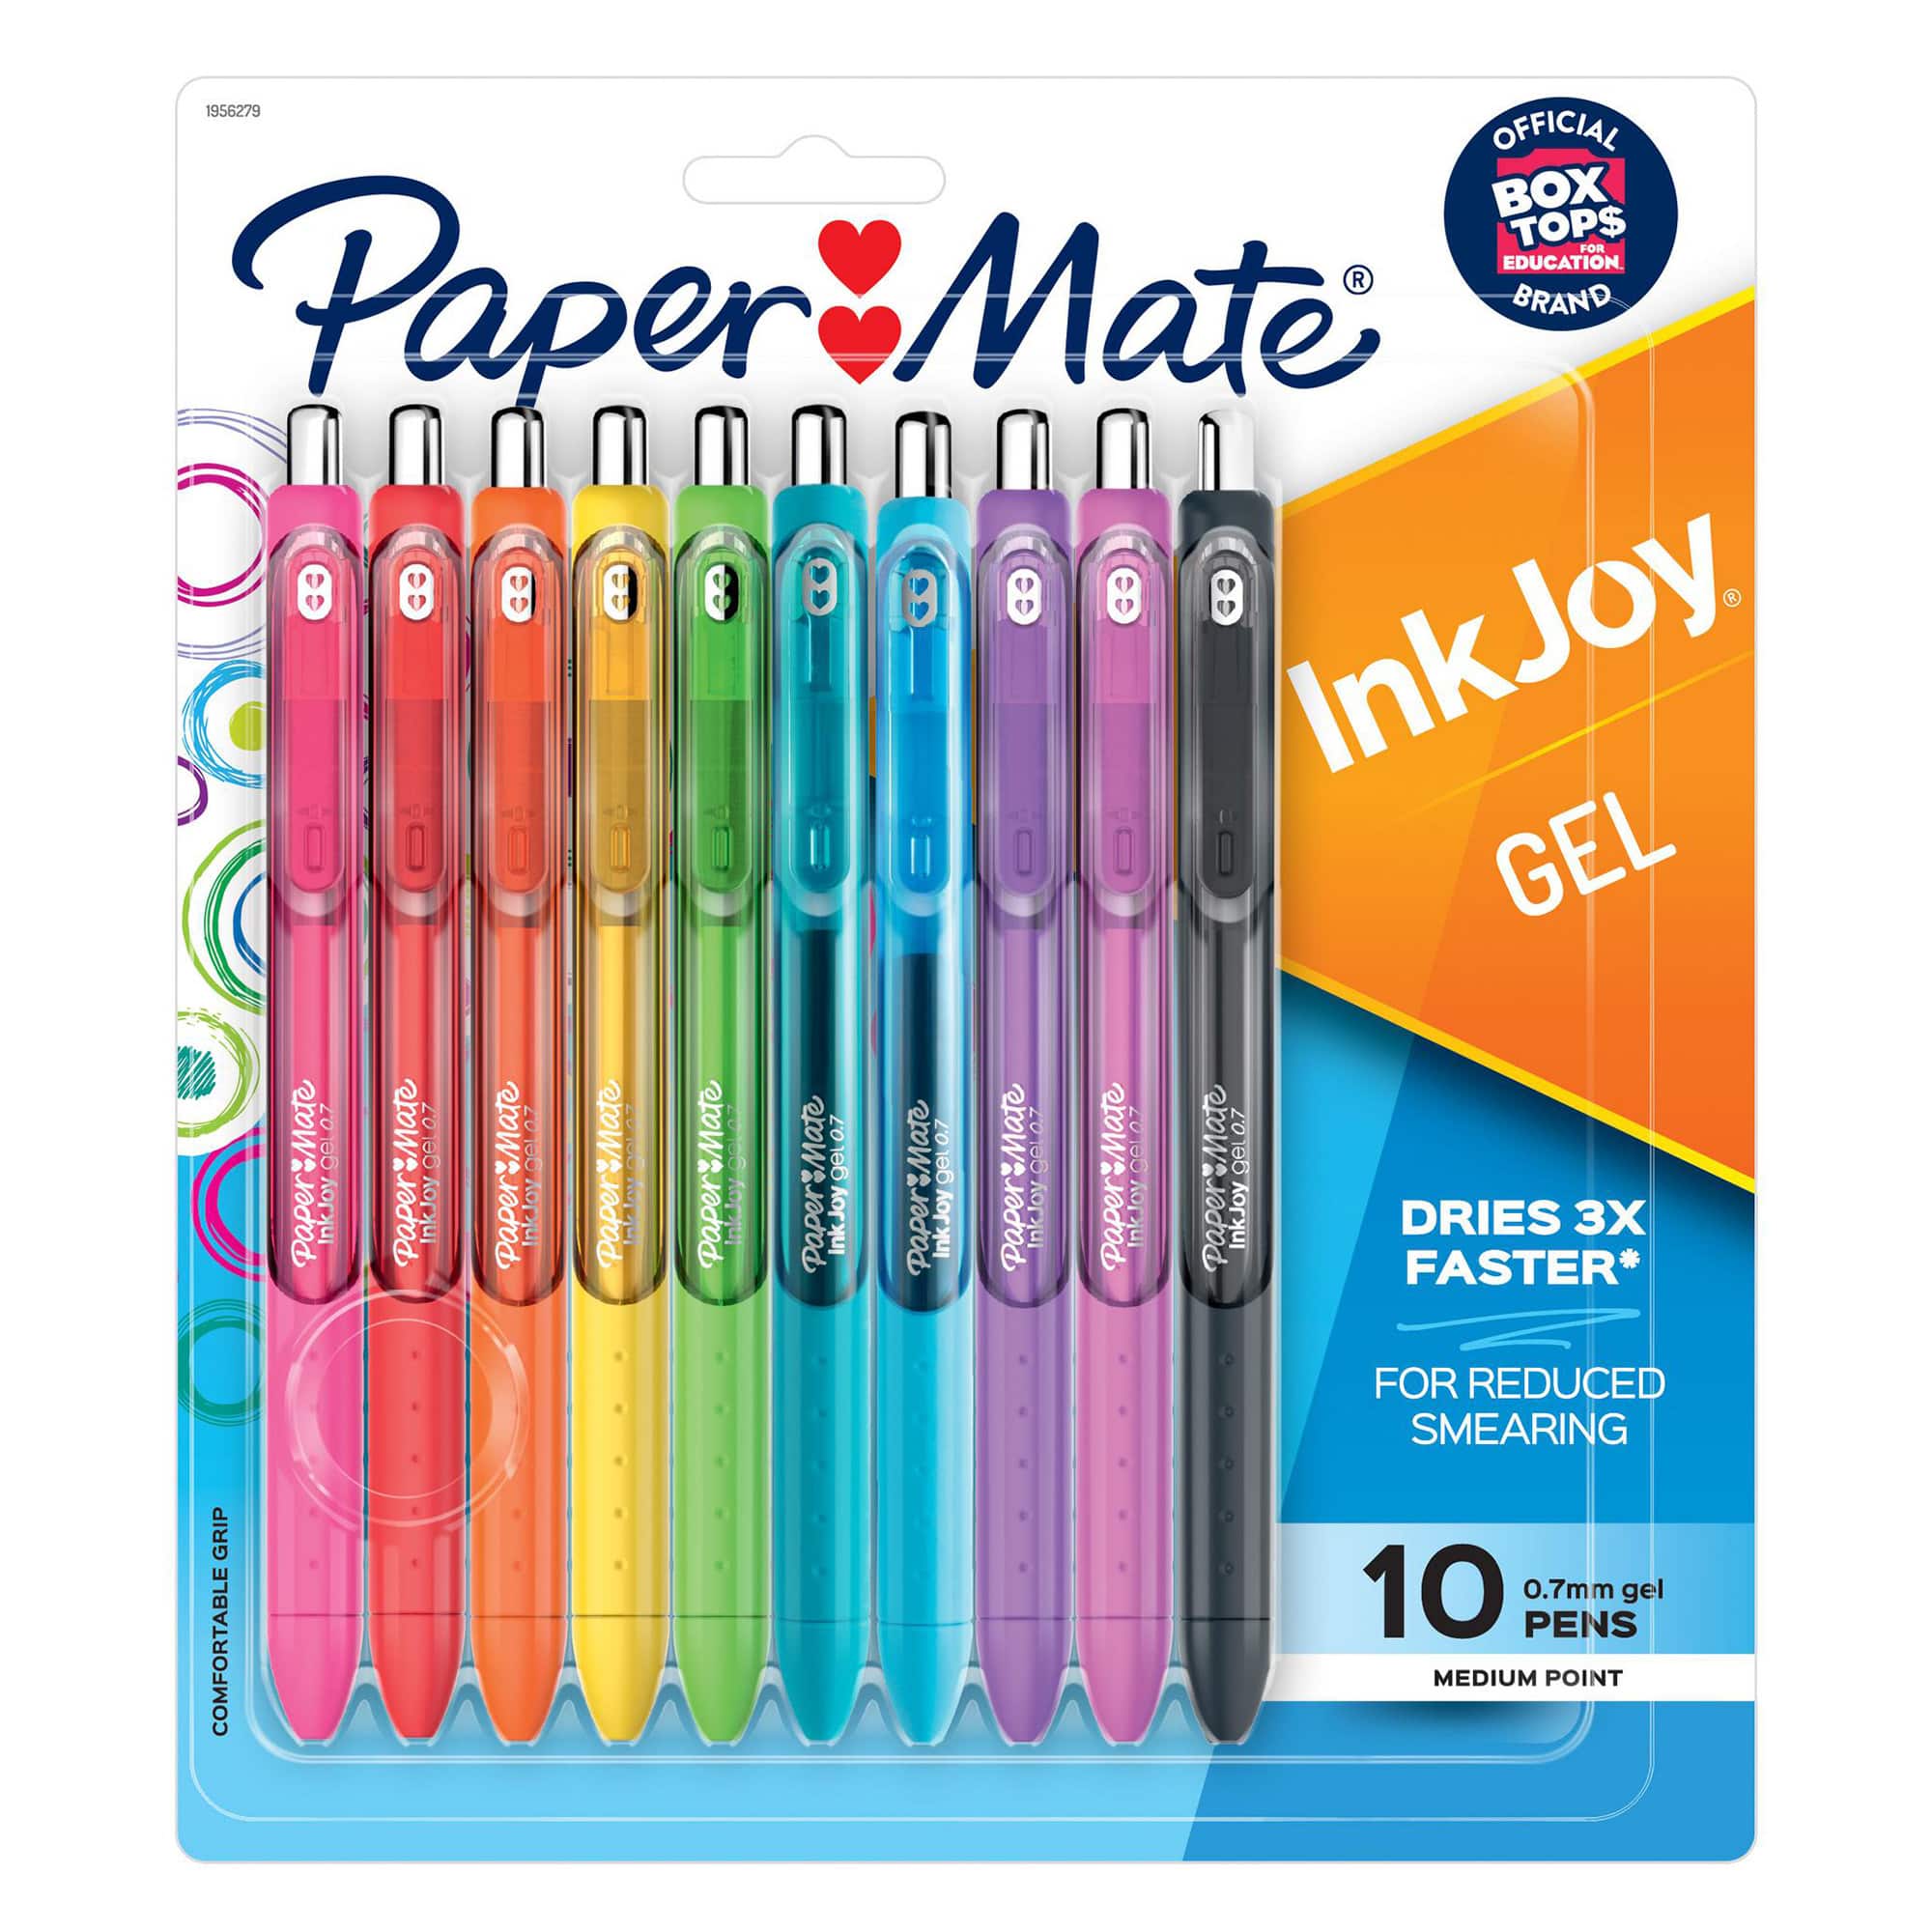 Paper Mate InkJoy Gel Pens, Medium Point (0.7 mm), Assorted Colors, 10 Count - image 1 of 7